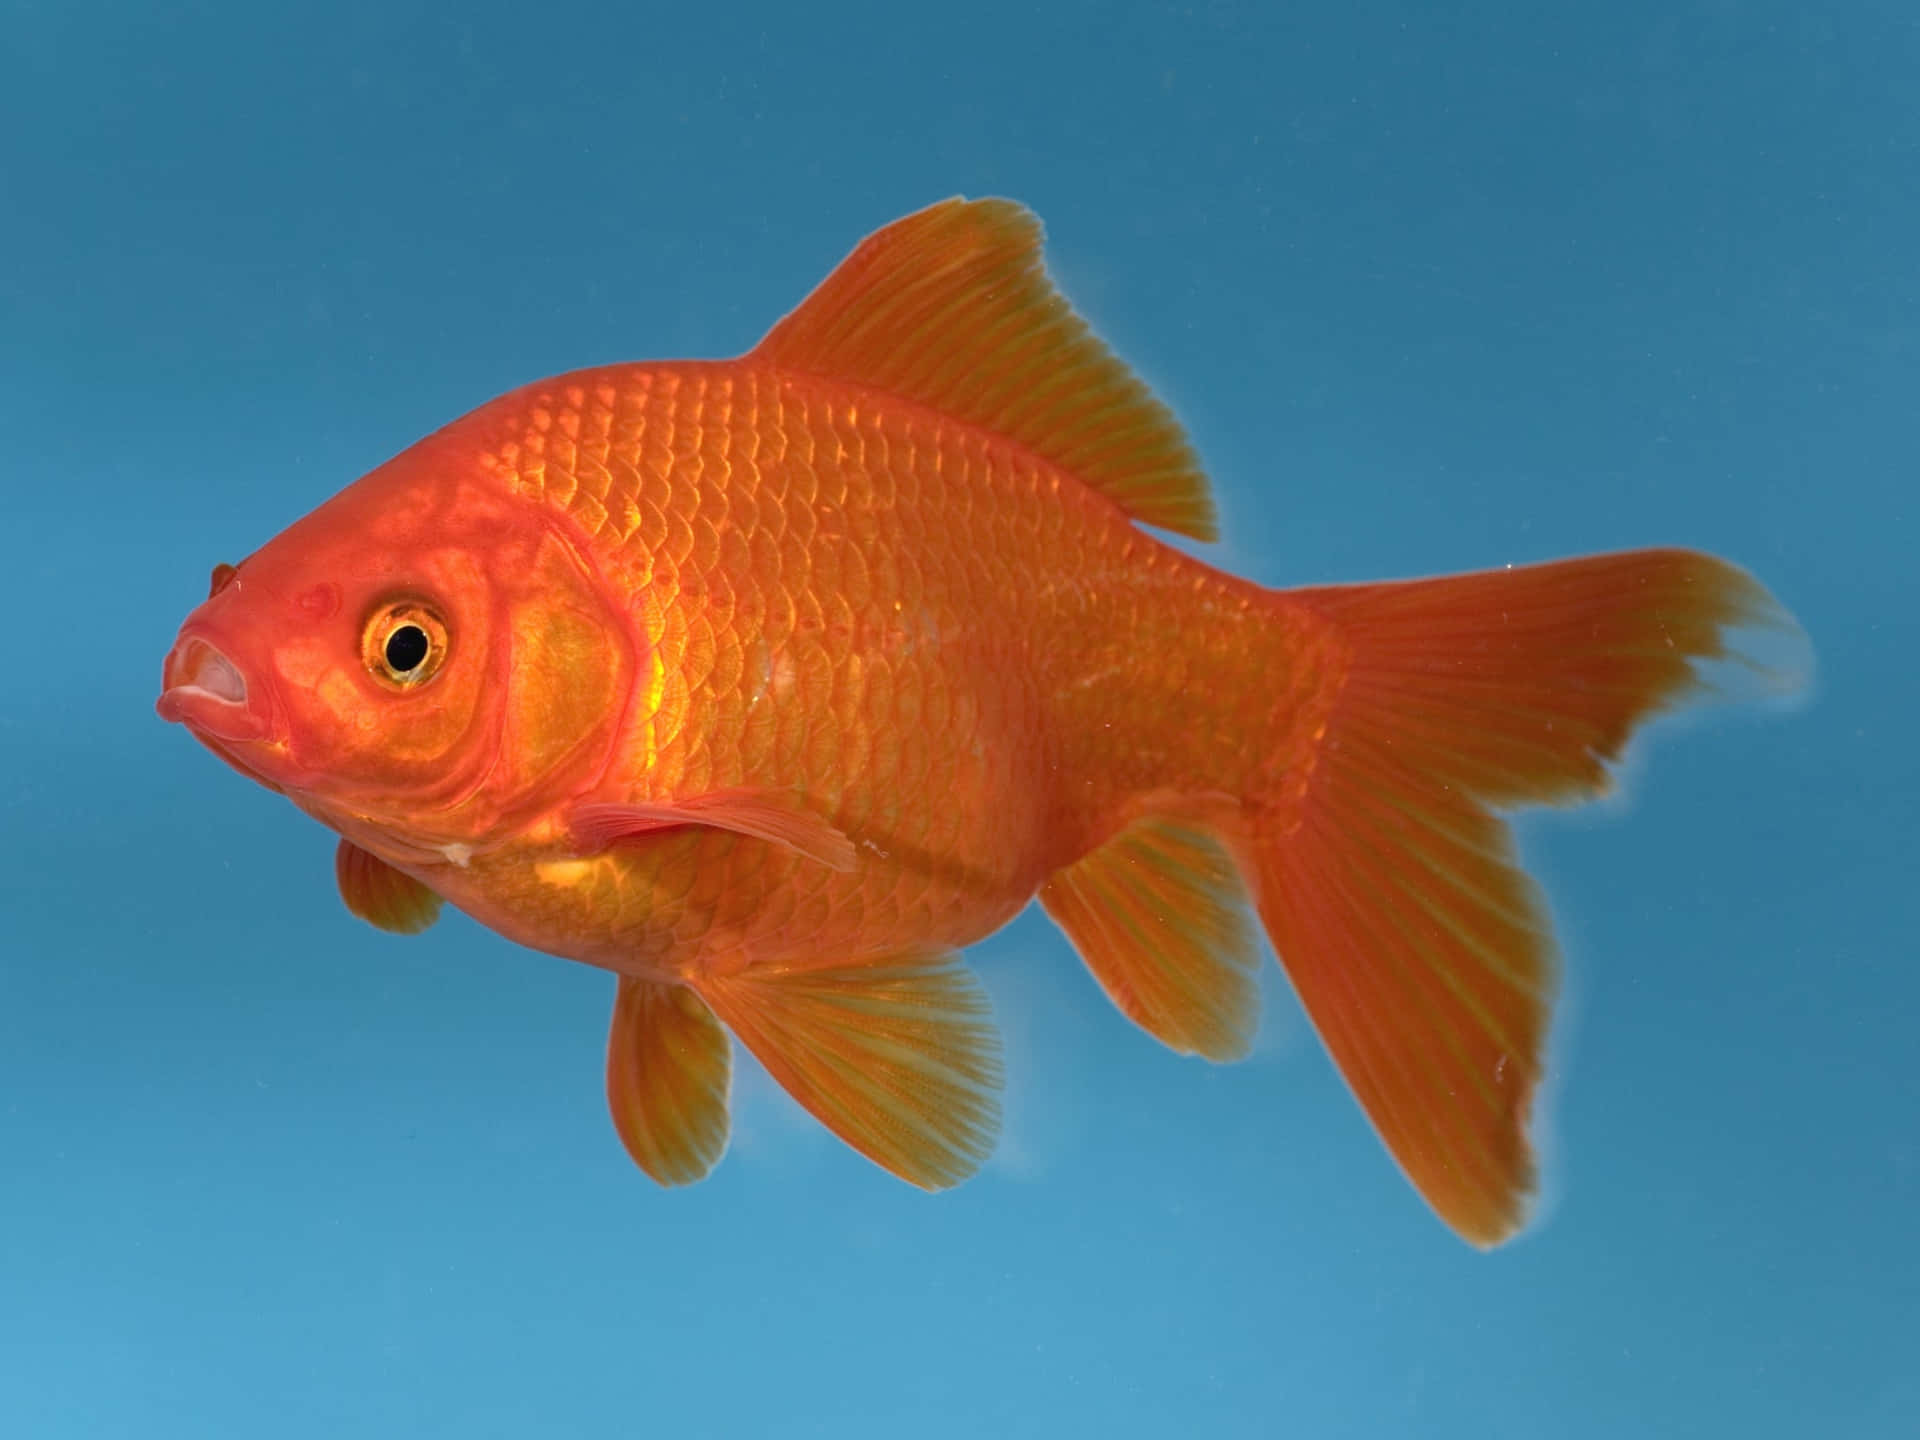 A brilliantly-colored goldfish ready for a swim!